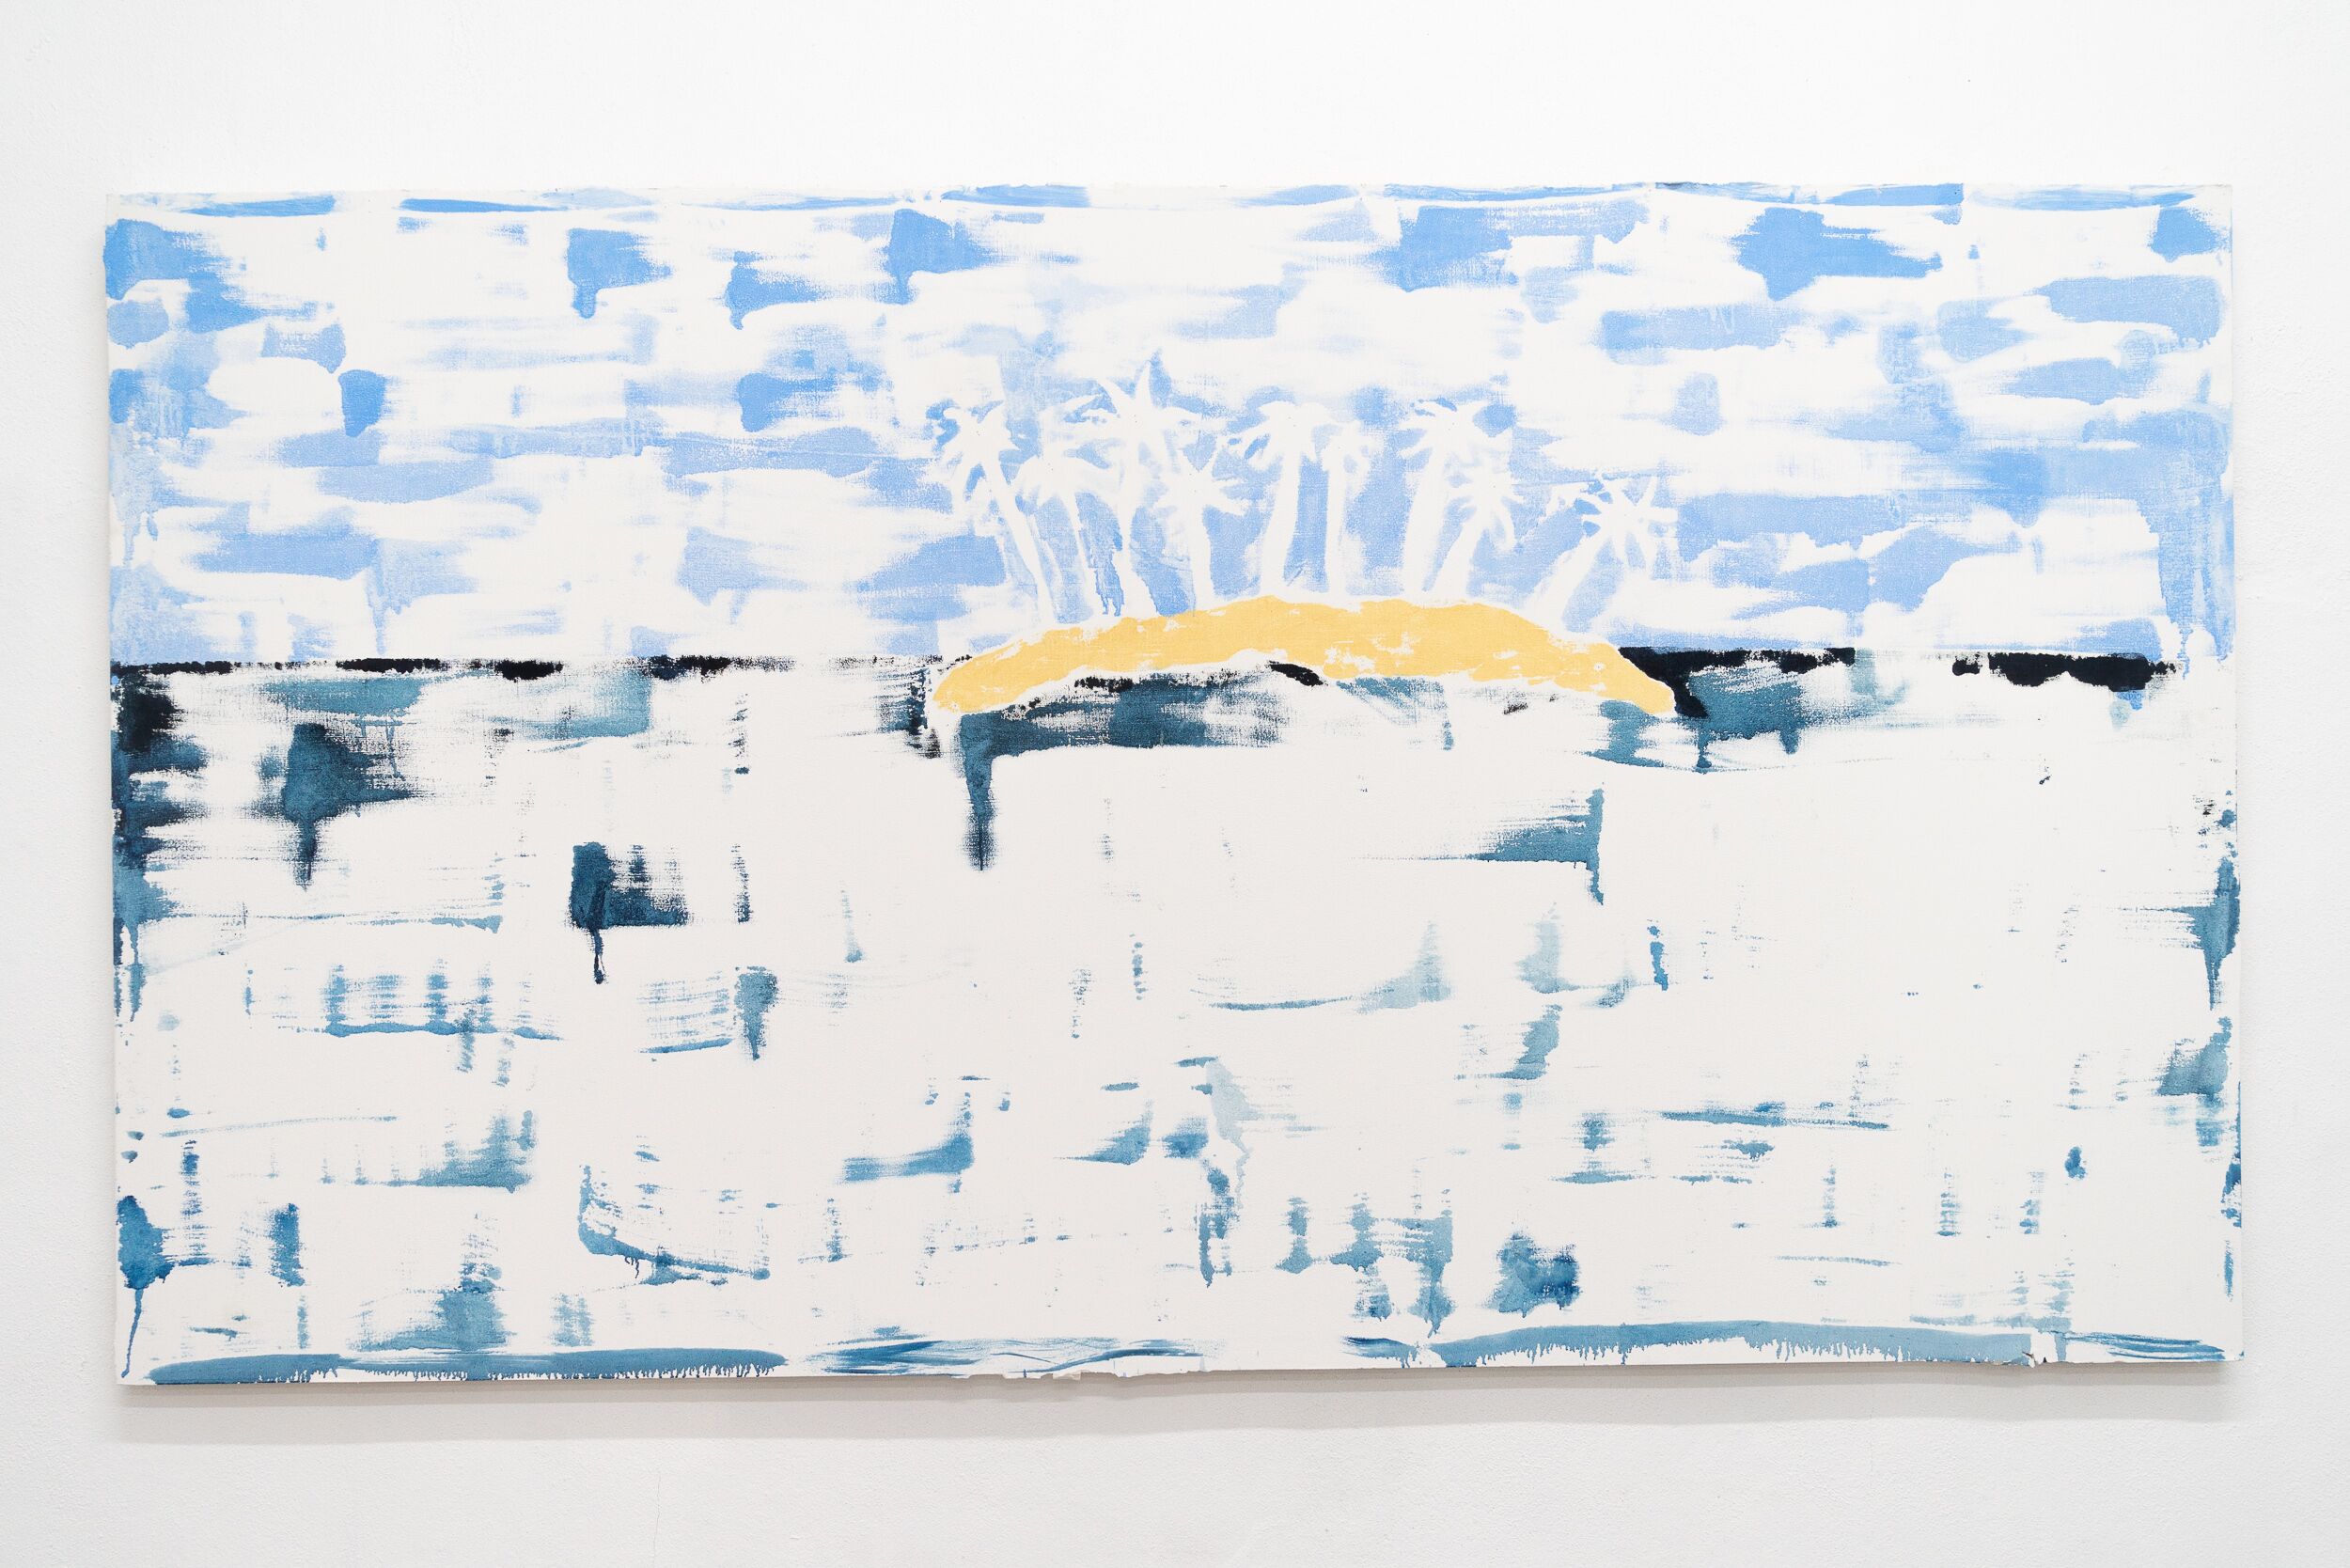   Emilie Gossiaux    Island After Image , 2018 oil paint on drywall   60 x 108 inches 274.3 x 152.4 cm 